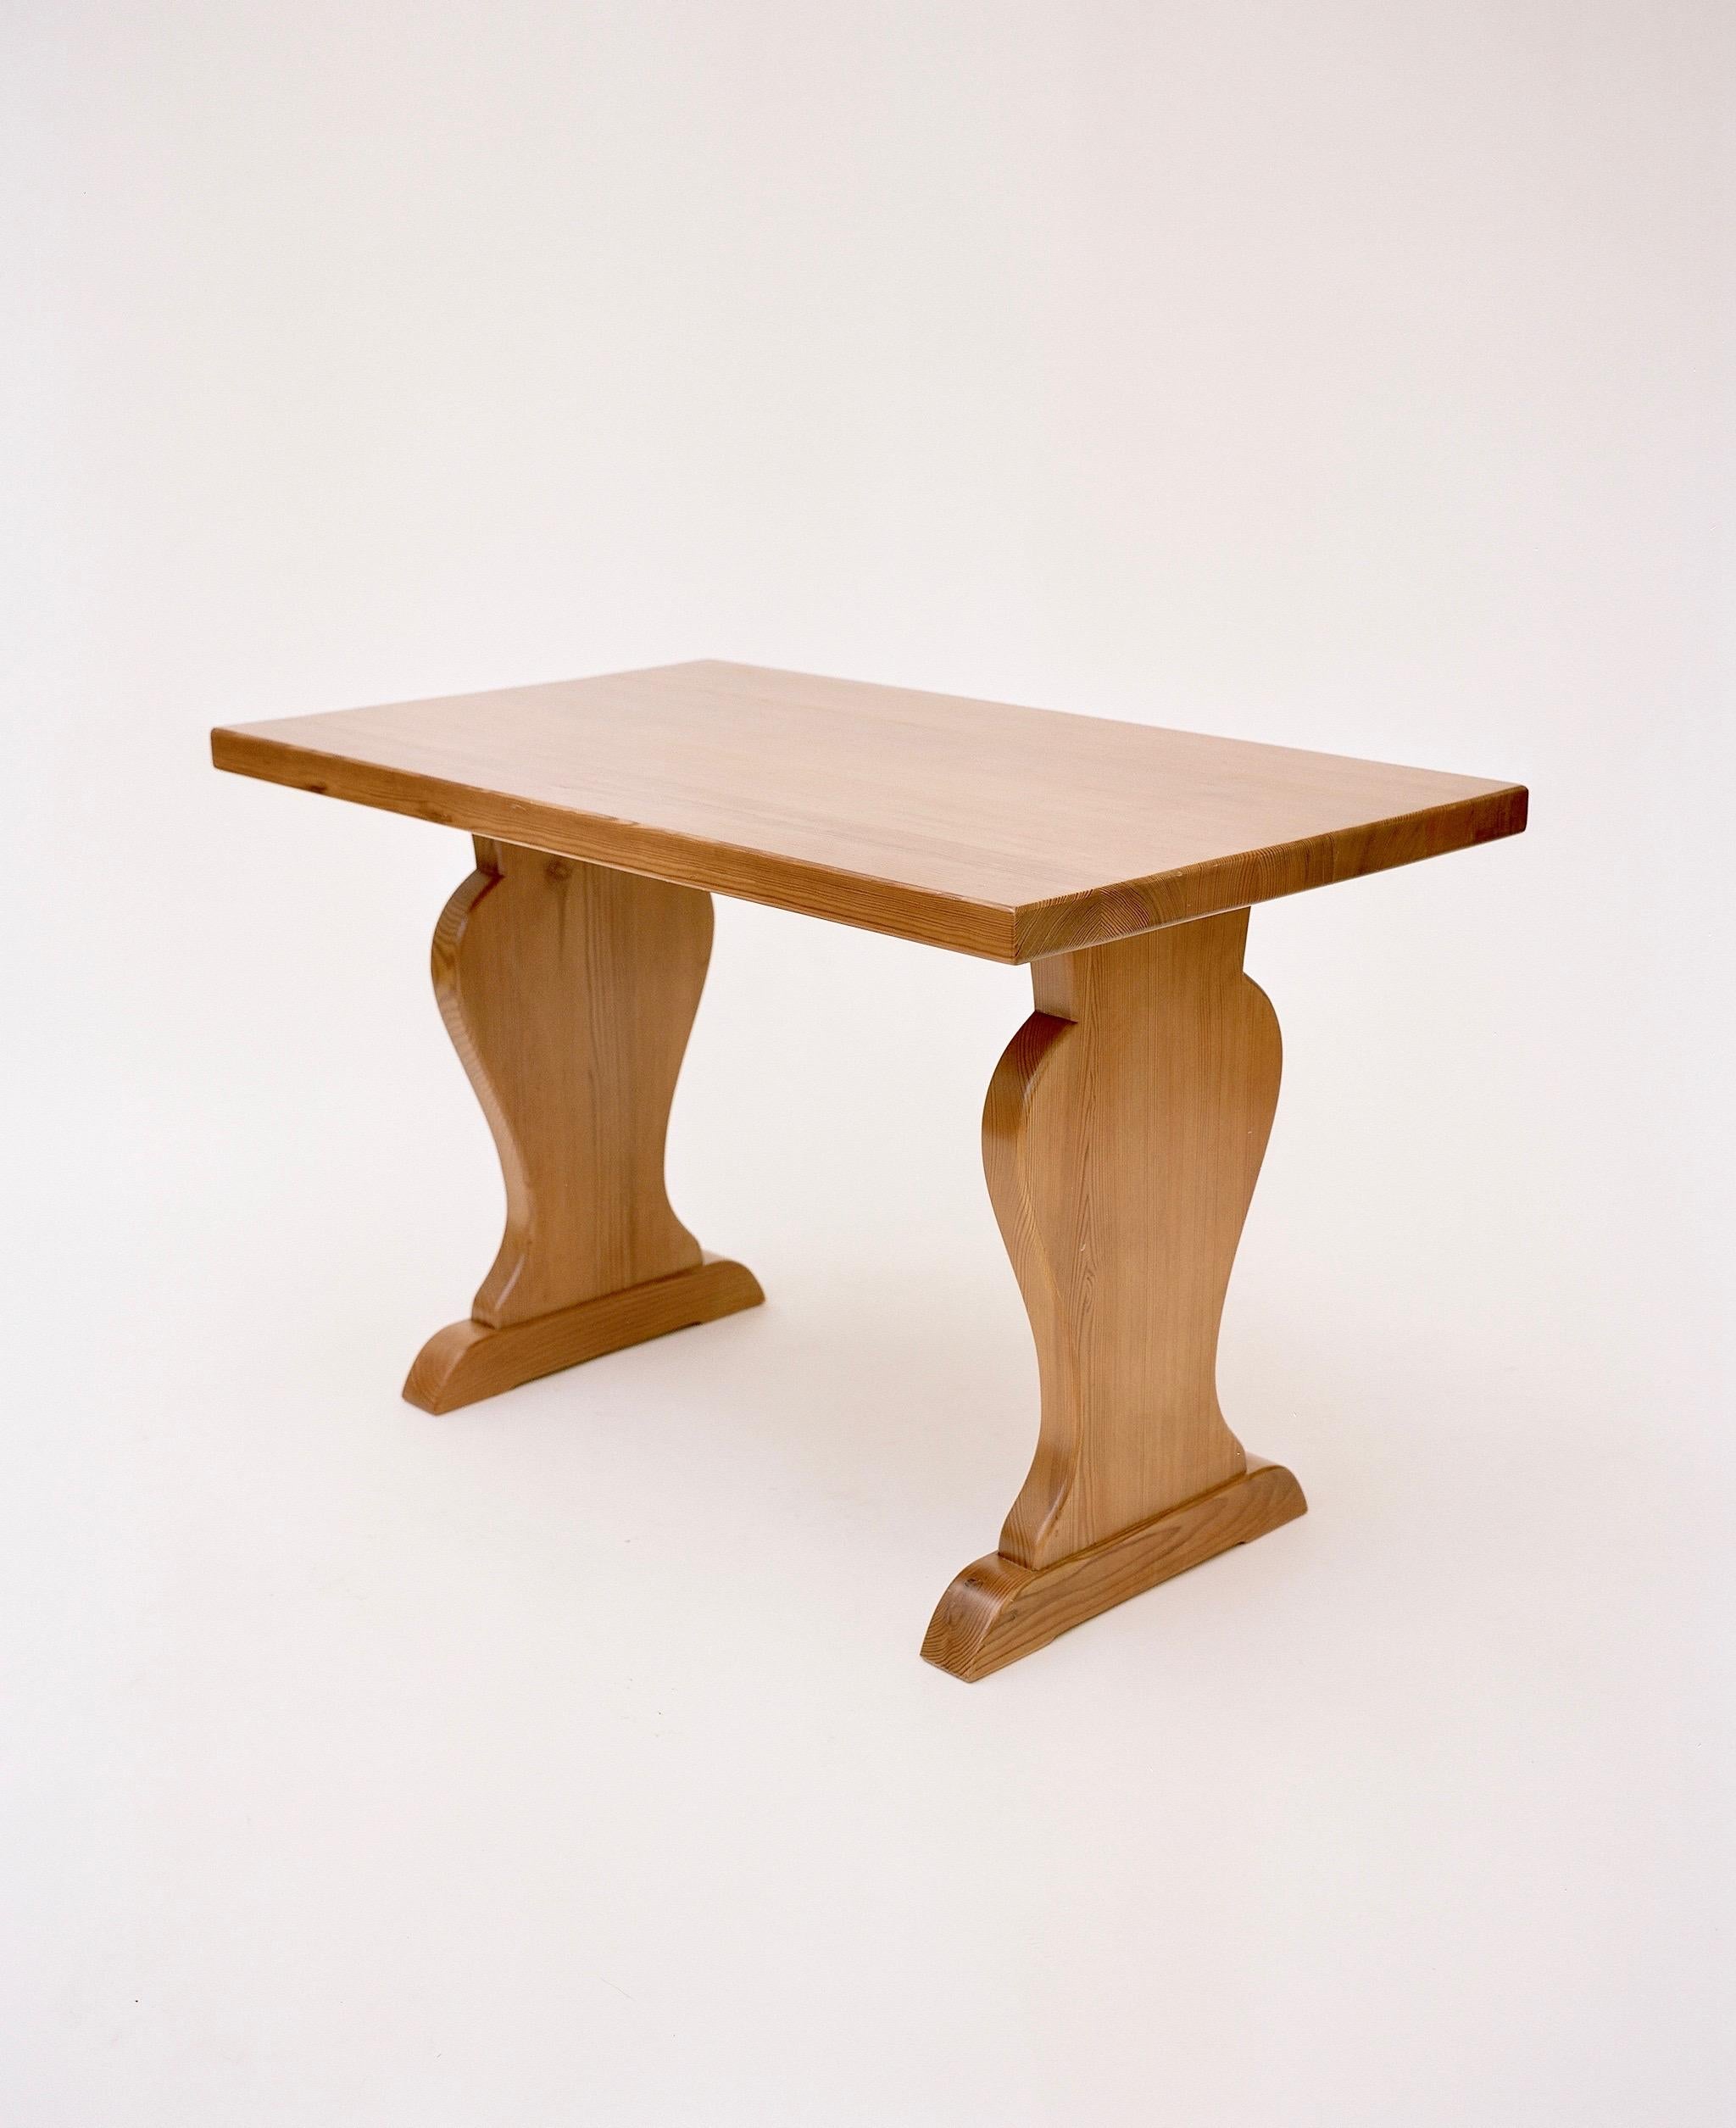 A pair of pine wood tables, that would serve as excellent bedside or side tables based on the height, designed by Axel Einar Hjorth for Nordiska Kompaniet. Between 1926-1938, Hjorth was the lead designer for Sweden’s Nordiska Kompaniet department